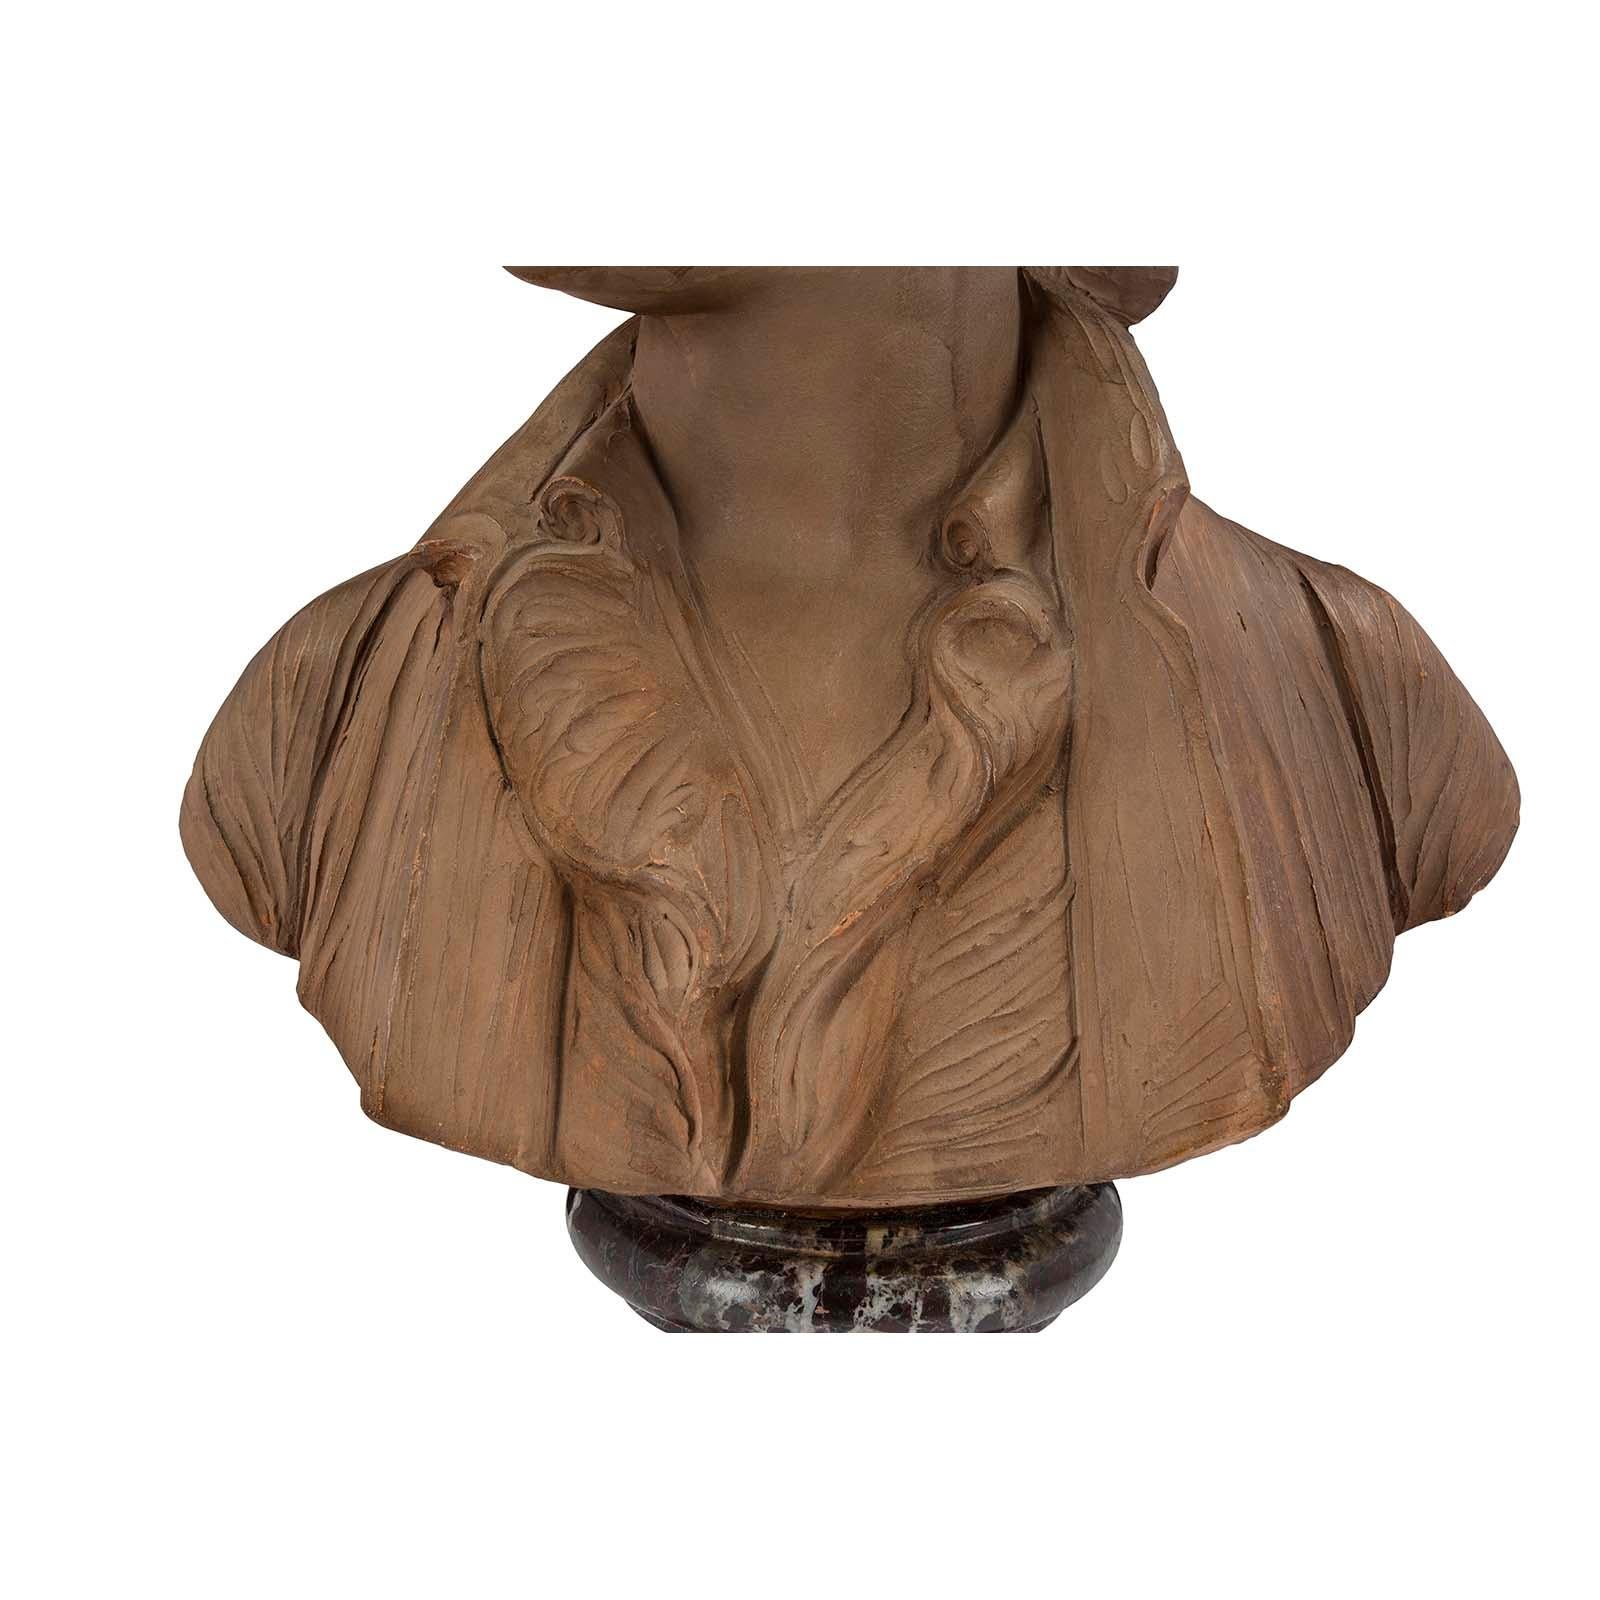 French 19th Century Louis XVI Style Terracotta Bust of a Young Boy Signed Houdon For Sale 3